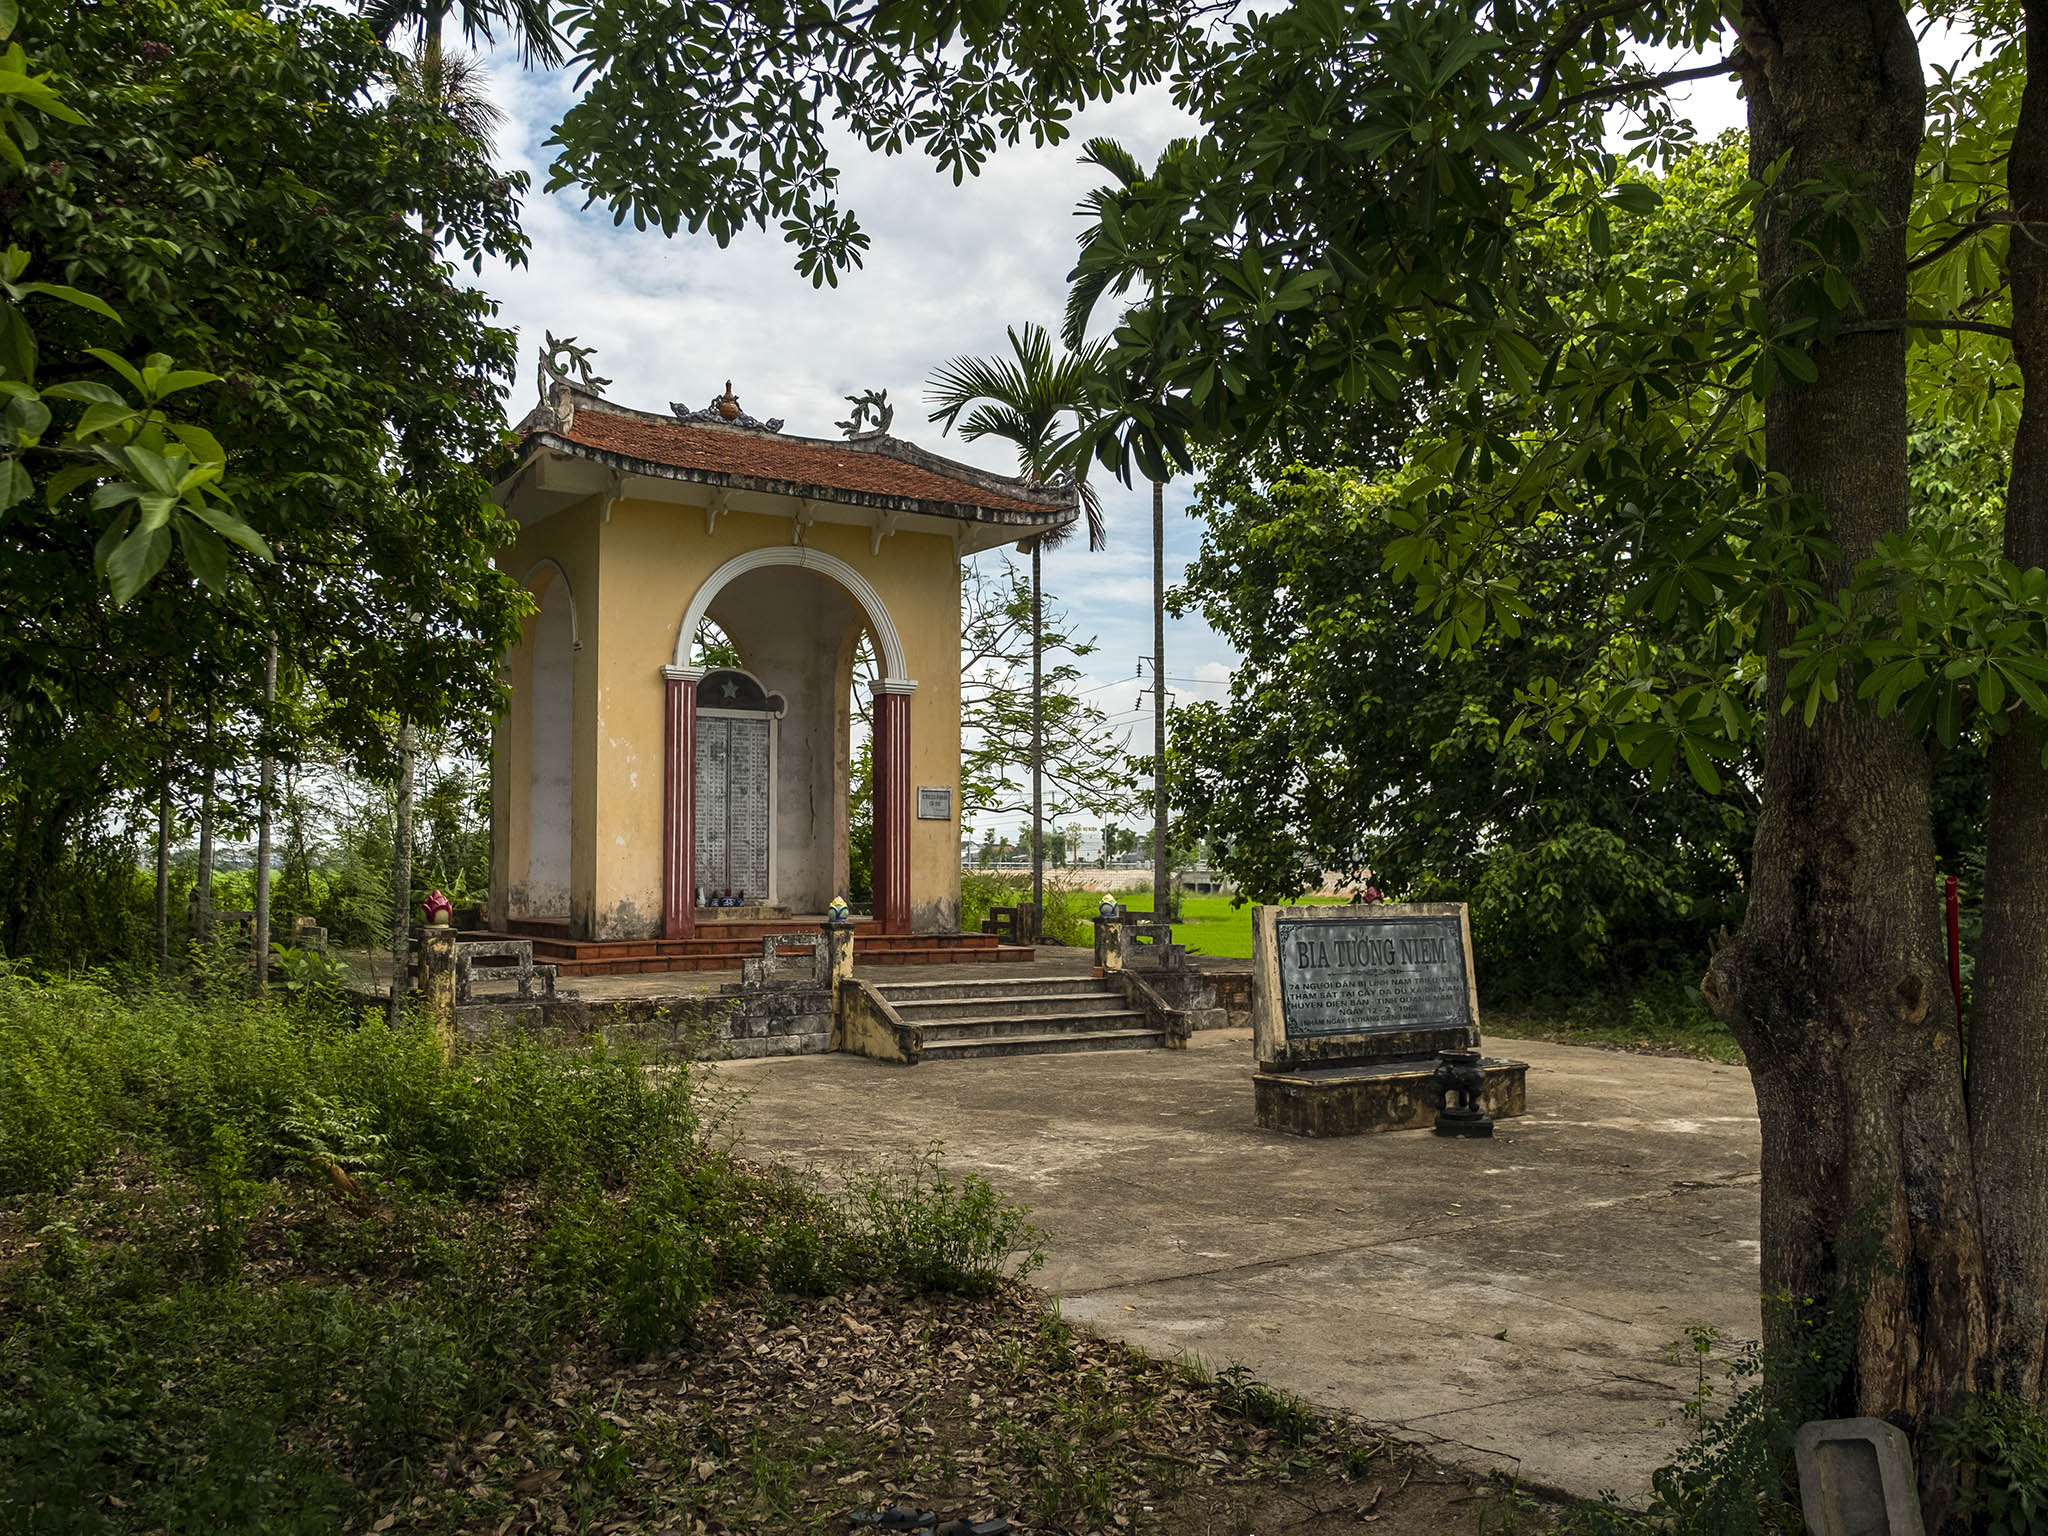 A memorial site marks the area in Vietnam where South Korean marines were accused of killing more than 70 unarmed Vietnamese civilians in 1968, in Quang Nam Province, Vietnam on July 12, 2021. (Linh Pham/The New York Times)